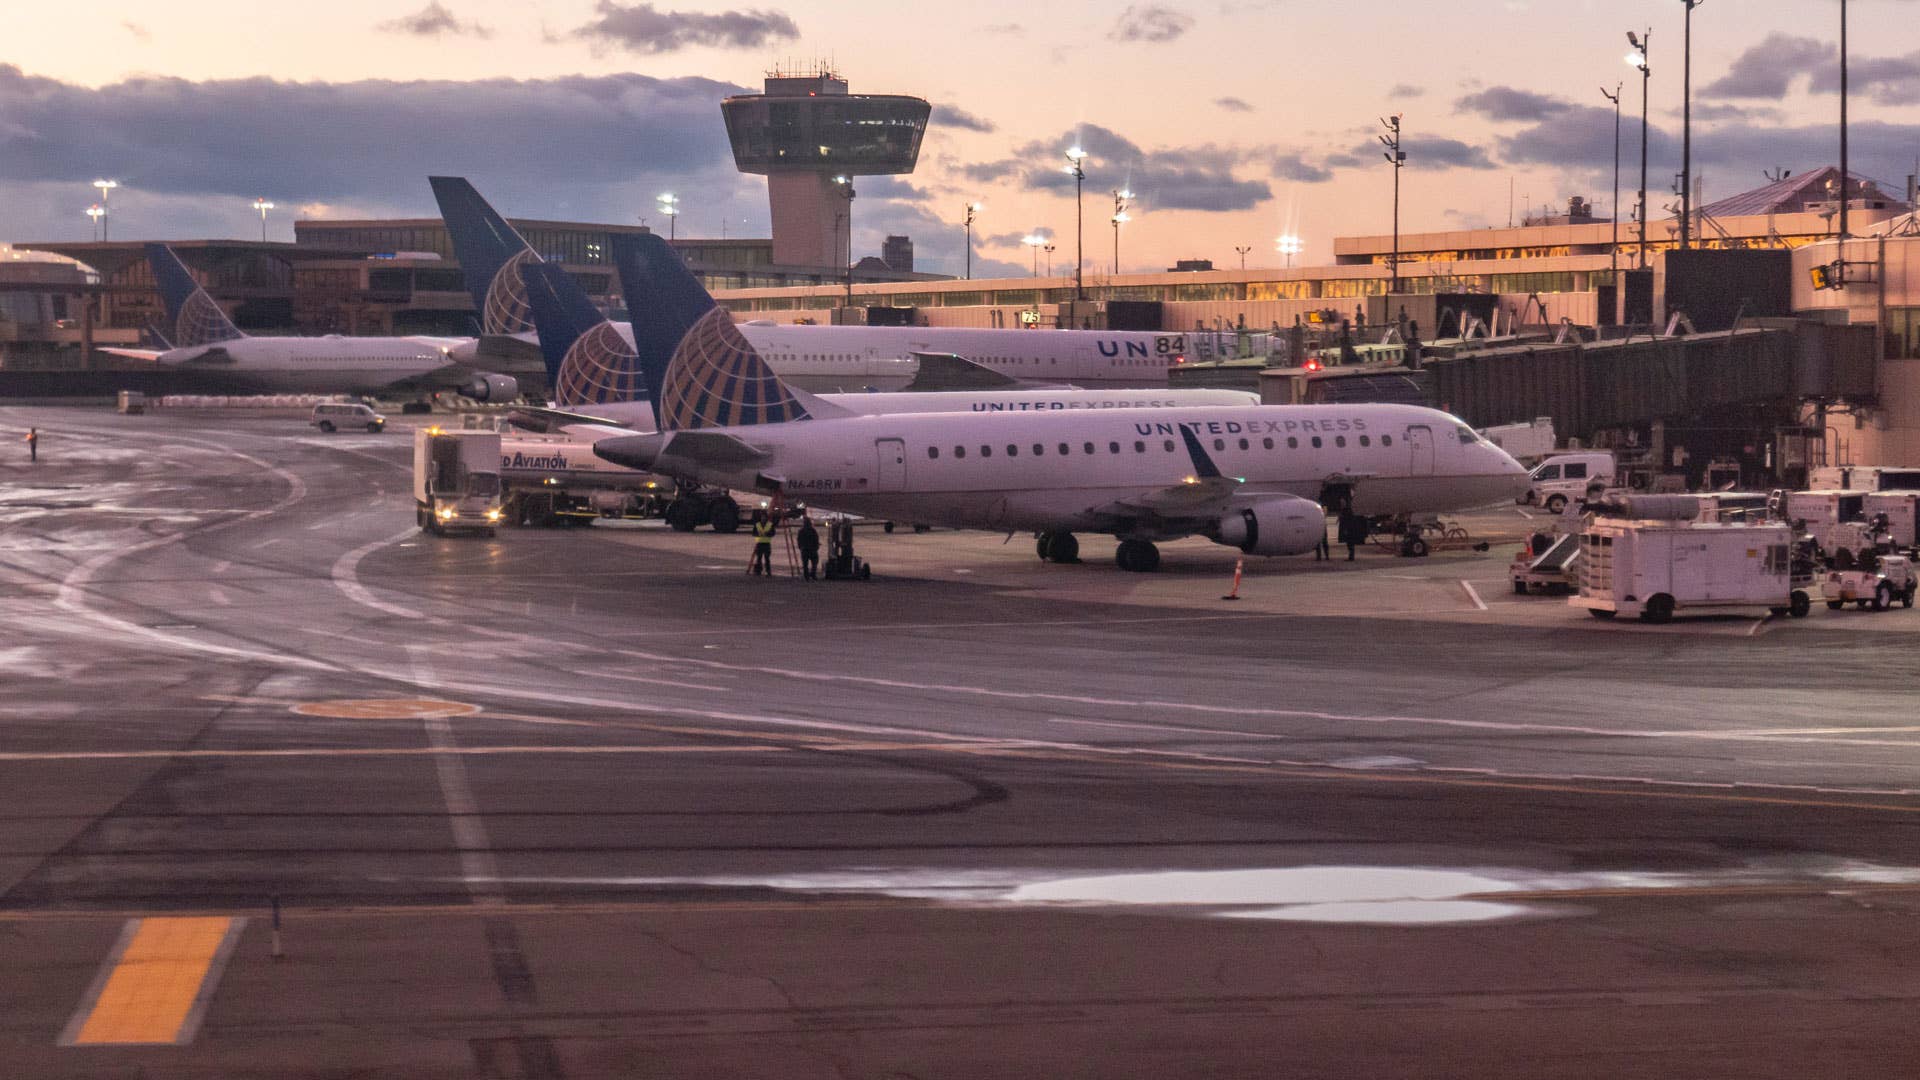 United Express planes